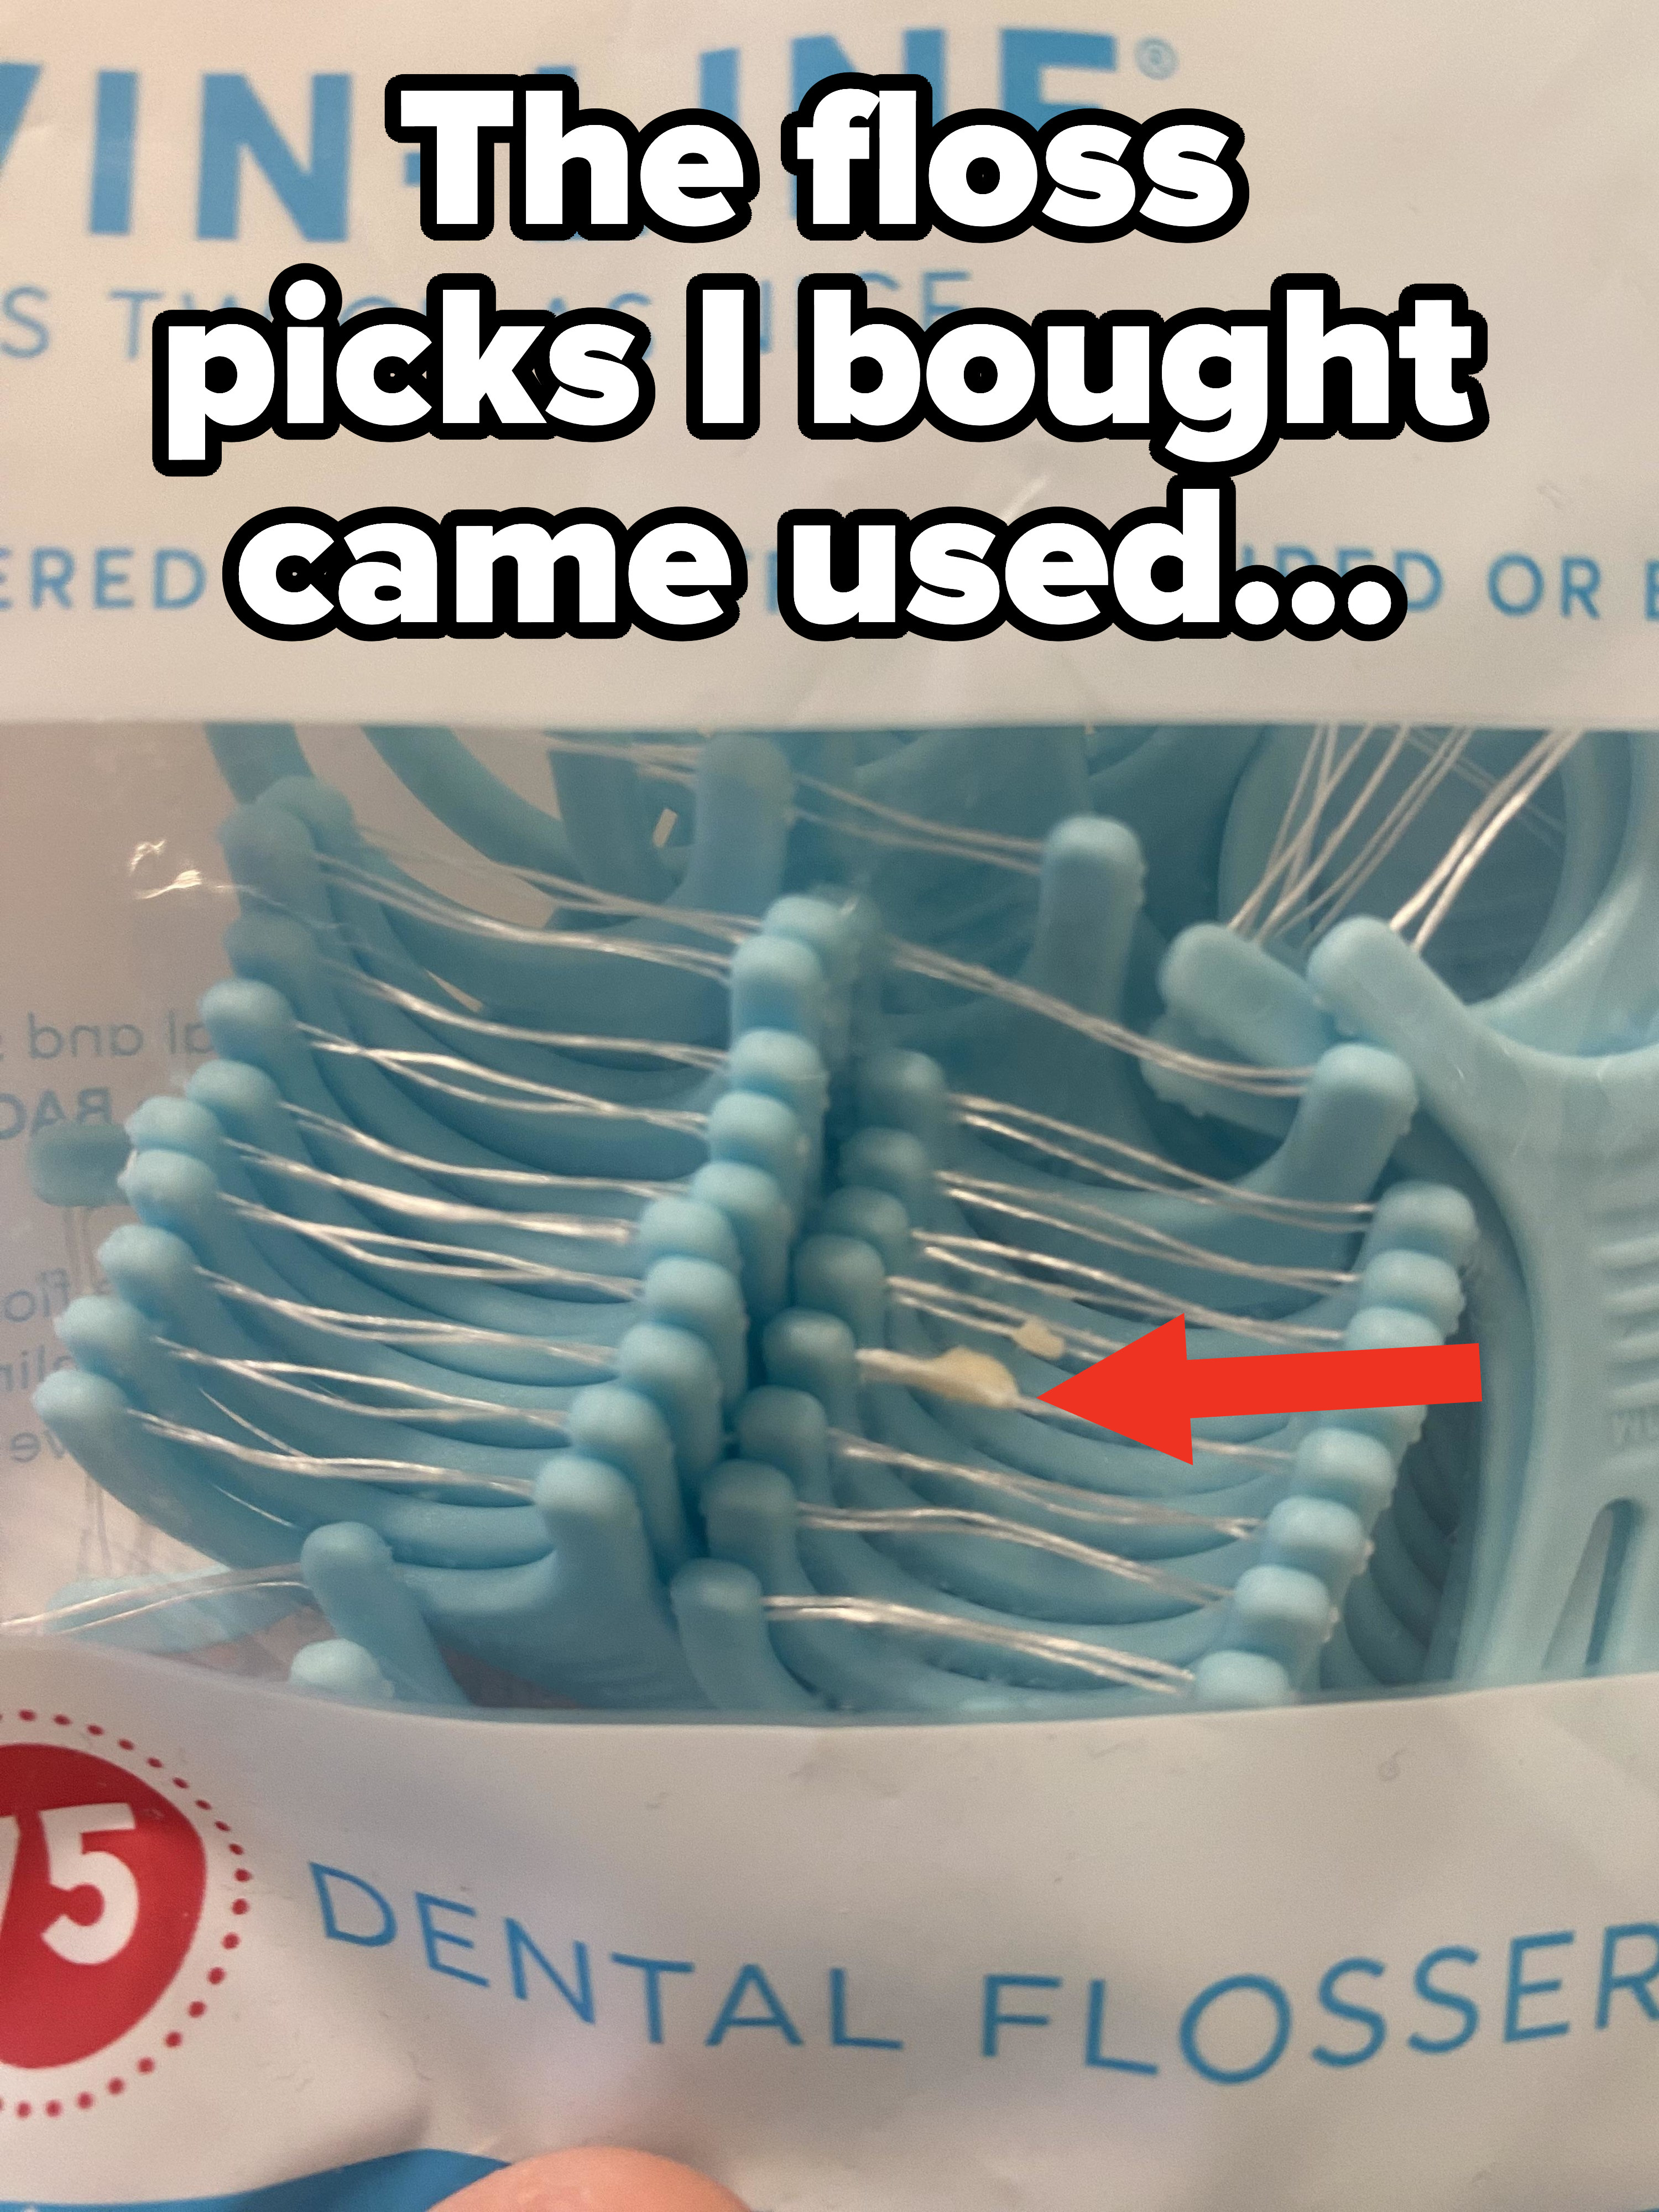 Dental floss with debris on it in the case